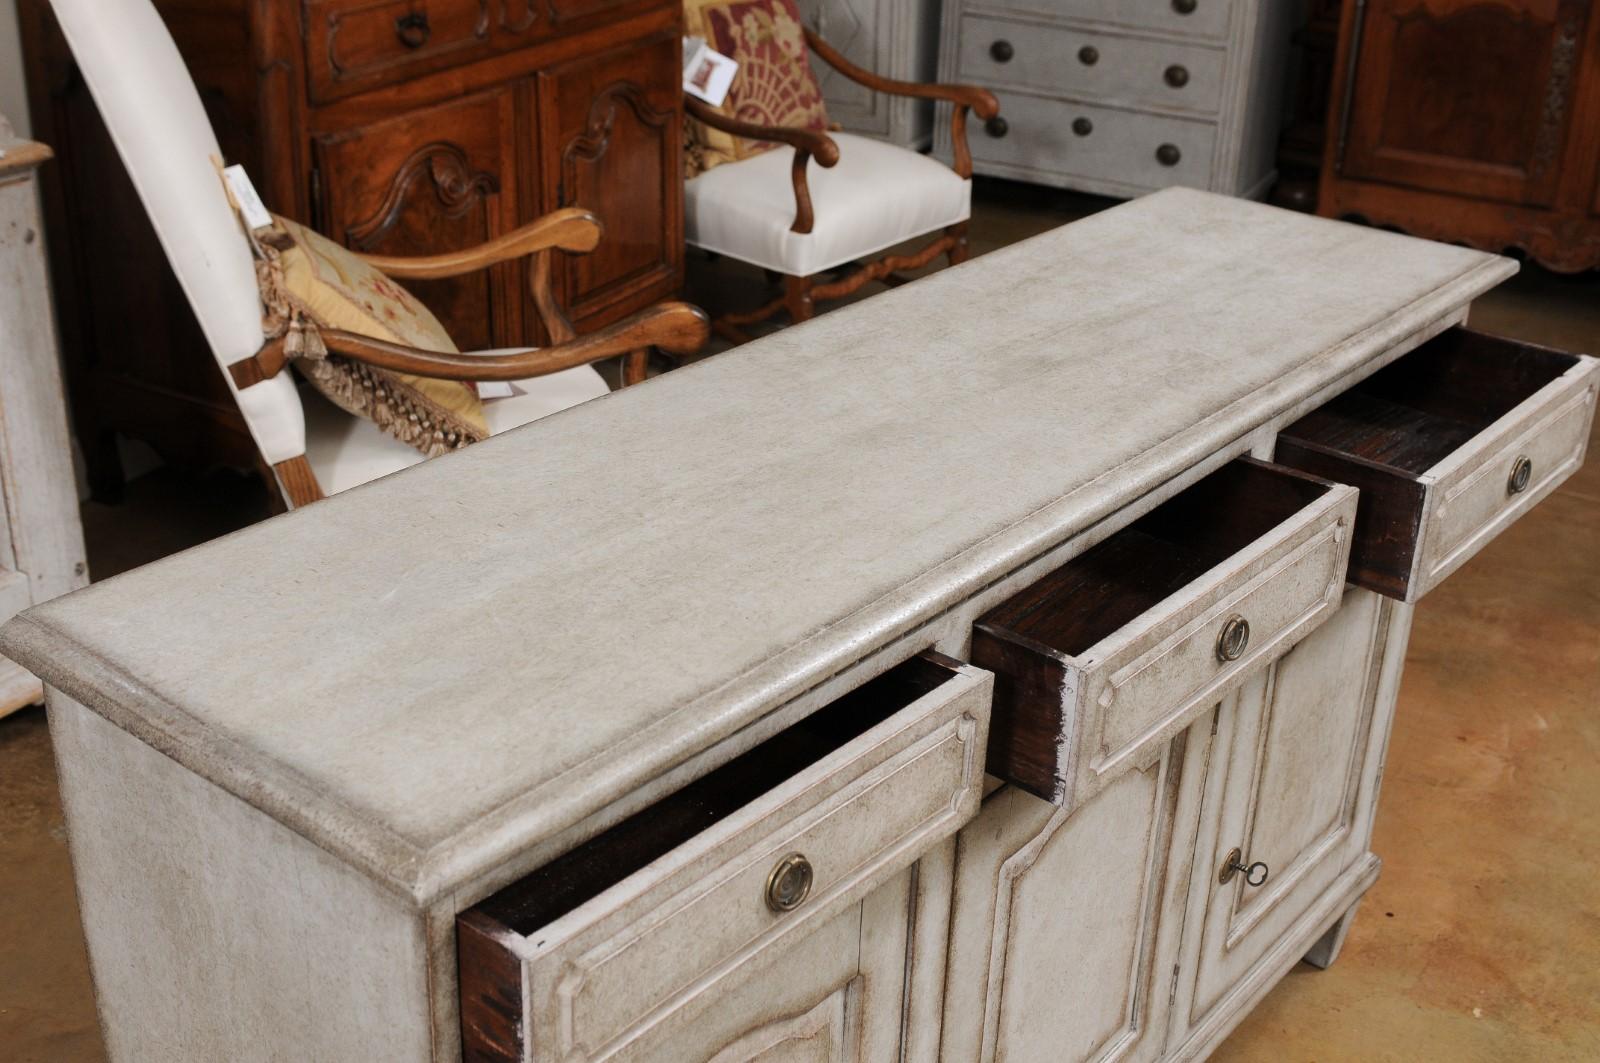 A Swedish painted wood sideboard from the late 19th century, with three drawers over three doors. Created in Sweden during the last decade of the 19th century, this painted sideboard features a rectangular top sitting above a carved molding. The